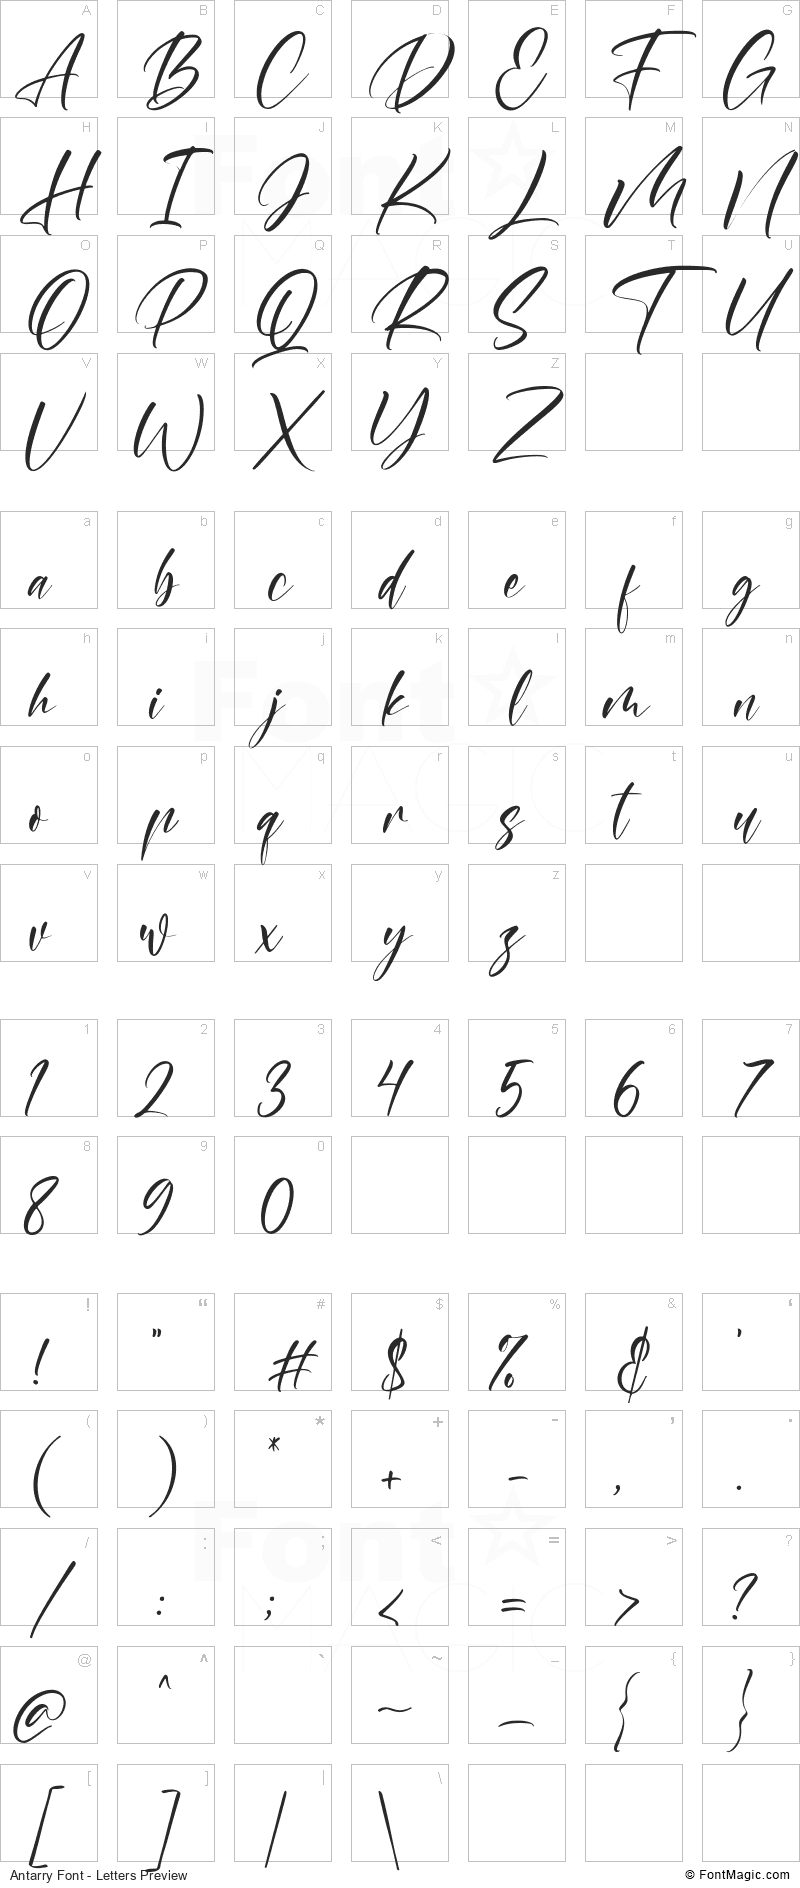 Antarry Font - All Latters Preview Chart